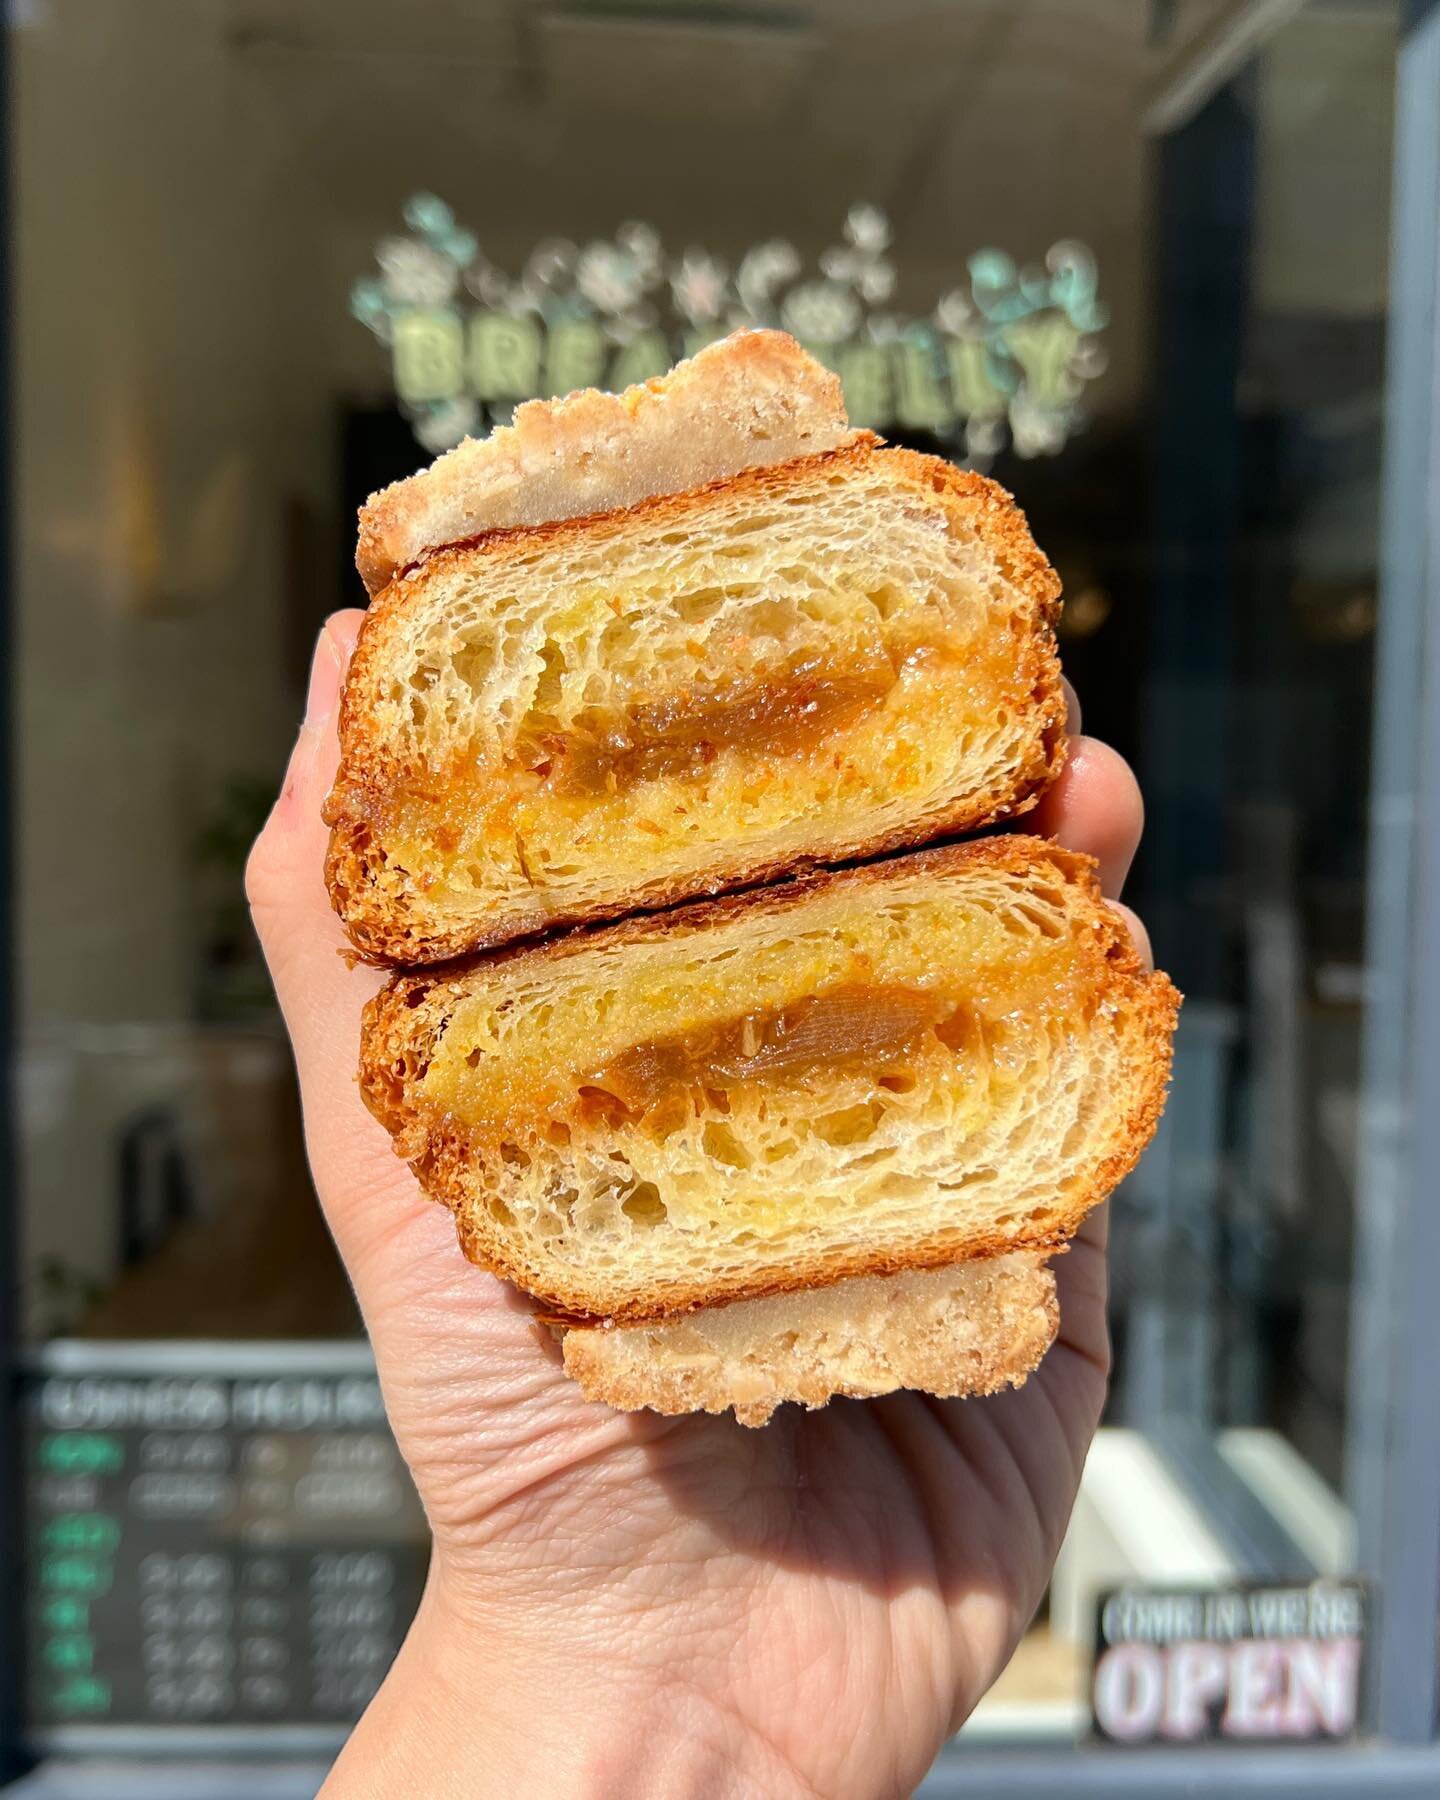 It&rsquo;s a great day for 🥐!
Twice-baked almond &amp; orange, double chocolate, or classic👌. Tough calls are made on the weekends&hellip;

Hand-made in house with only French Beurre D&rsquo;Isigny. Baked daily, fresh 🥐 always. 😘 

@breadbellysf
